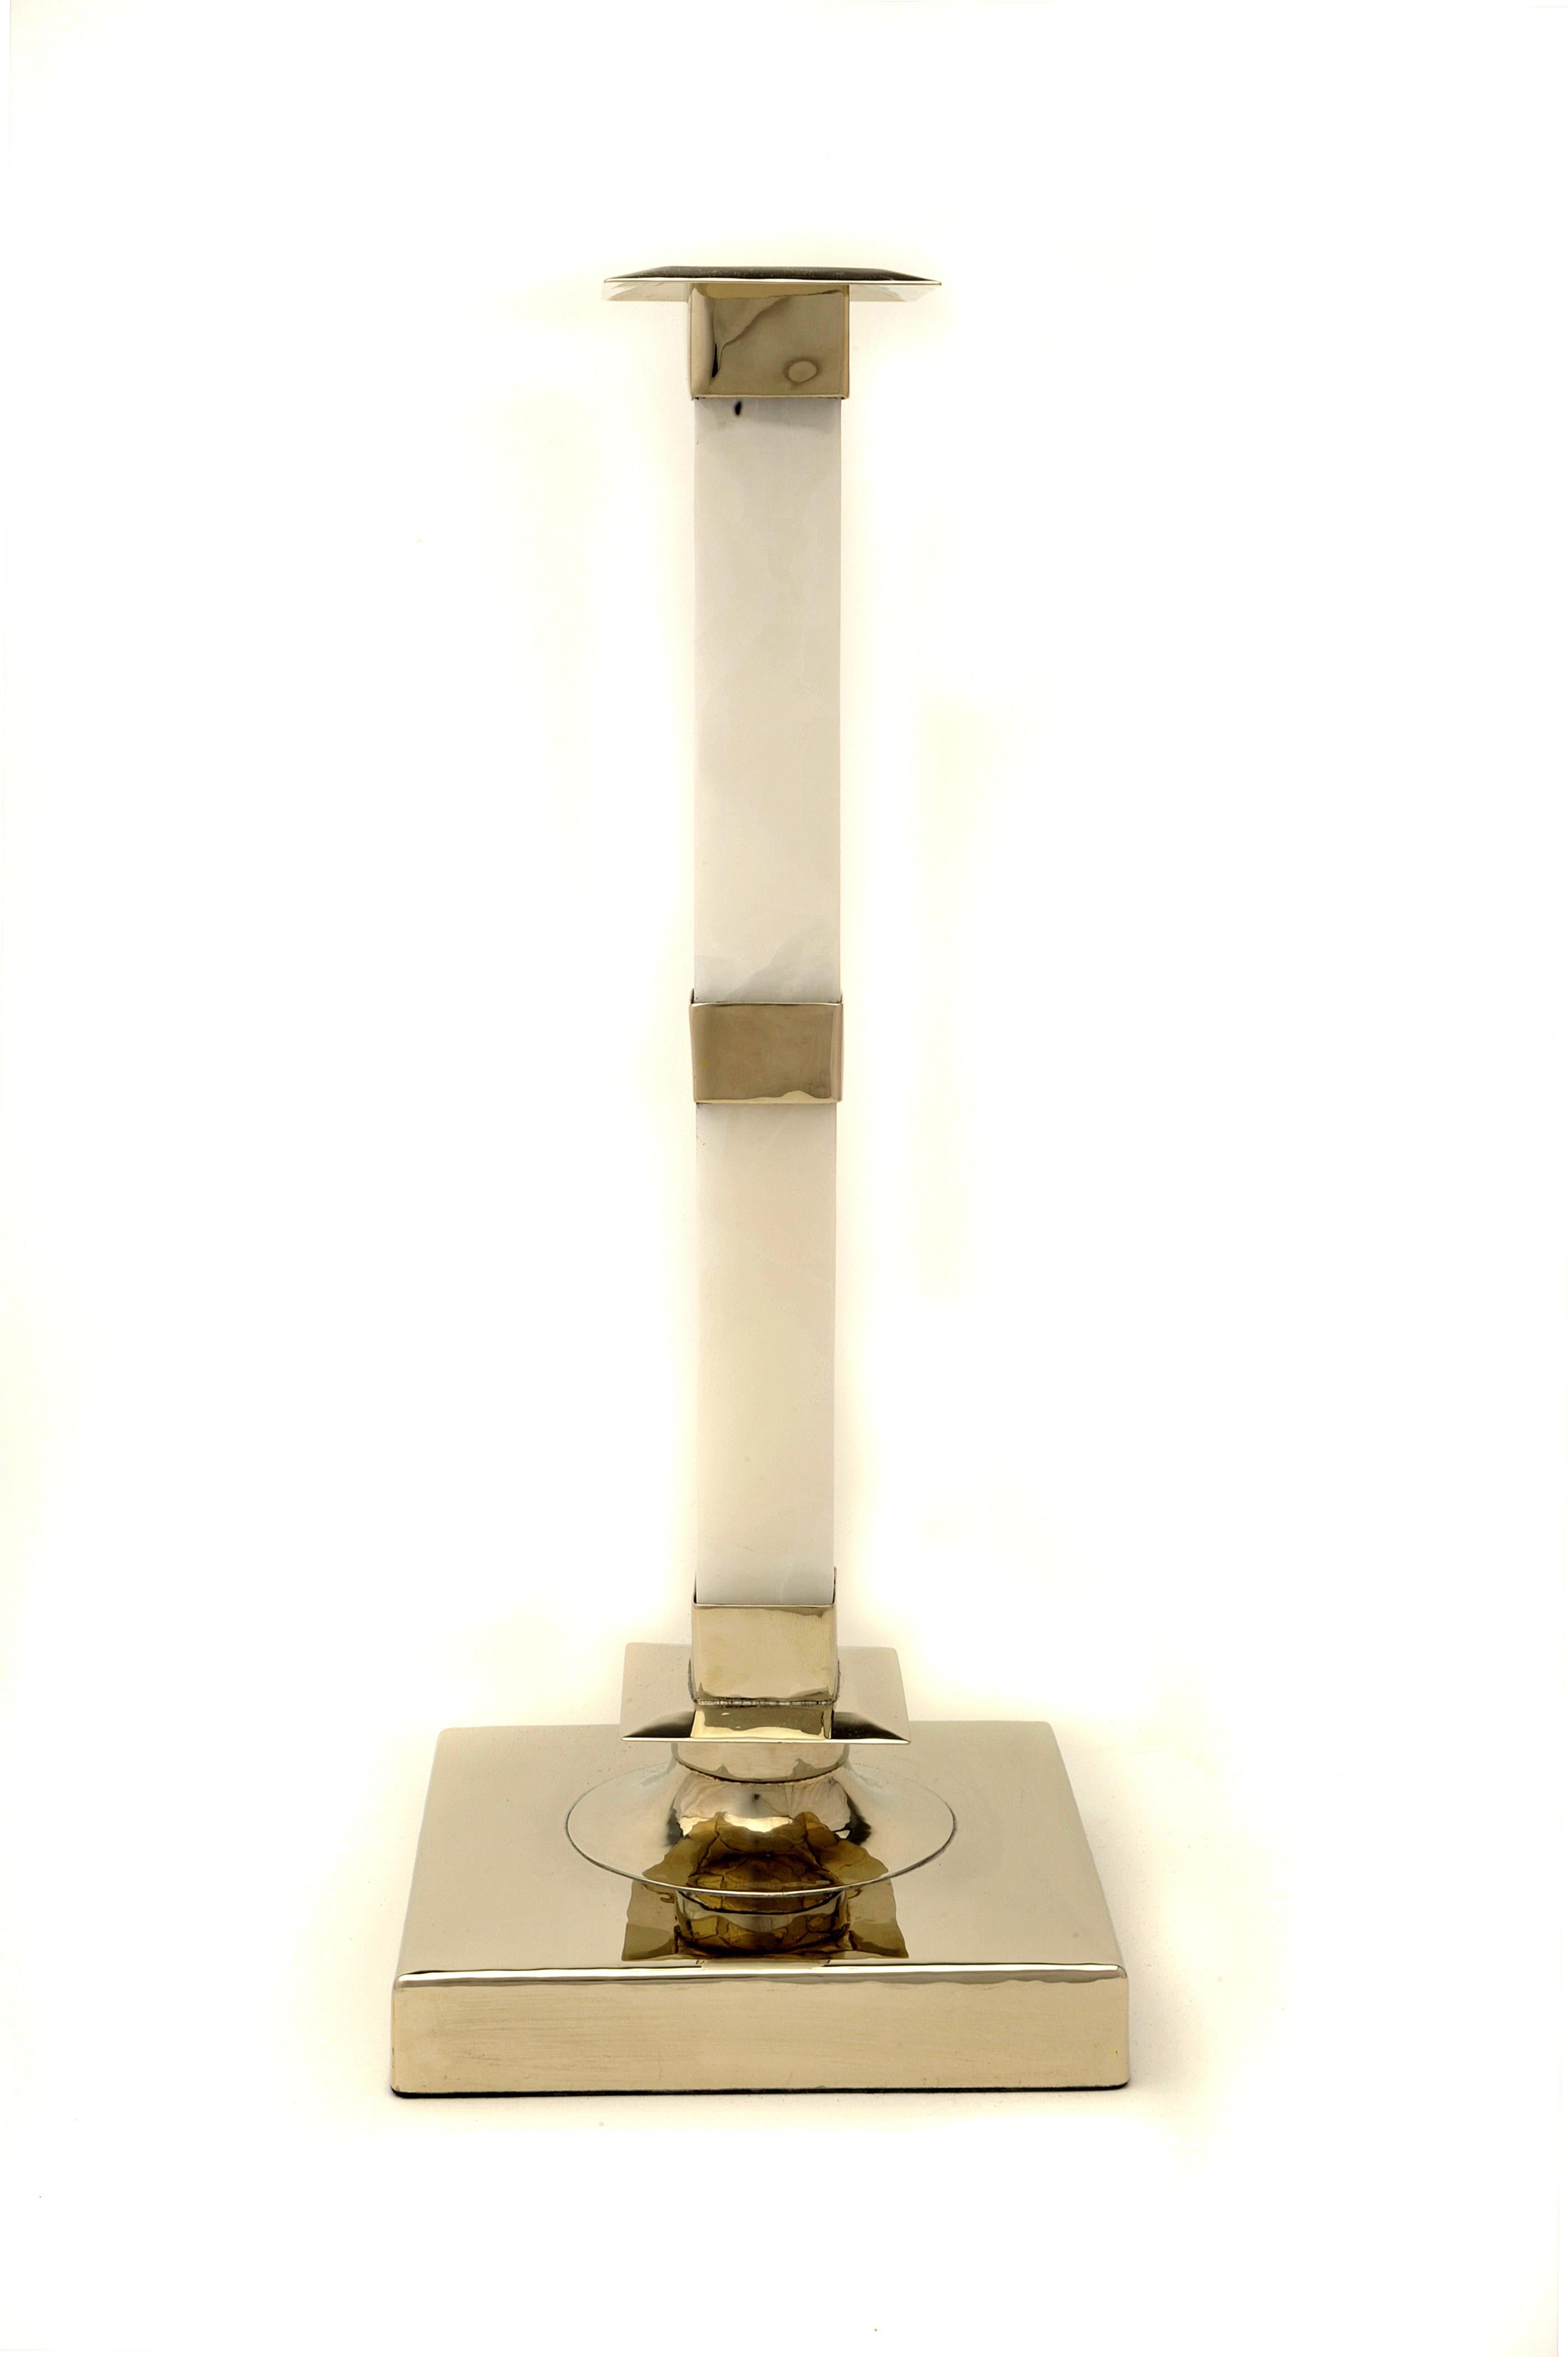 Salta Set Talls & Large Candlesticks, Alpaca Silver & Cream Onyx

Salta province is called the beautiful, and this adjective introduces us to its profound beauty. Its fertile valleys, windy desert, colorful mountains and blue sky are the images that